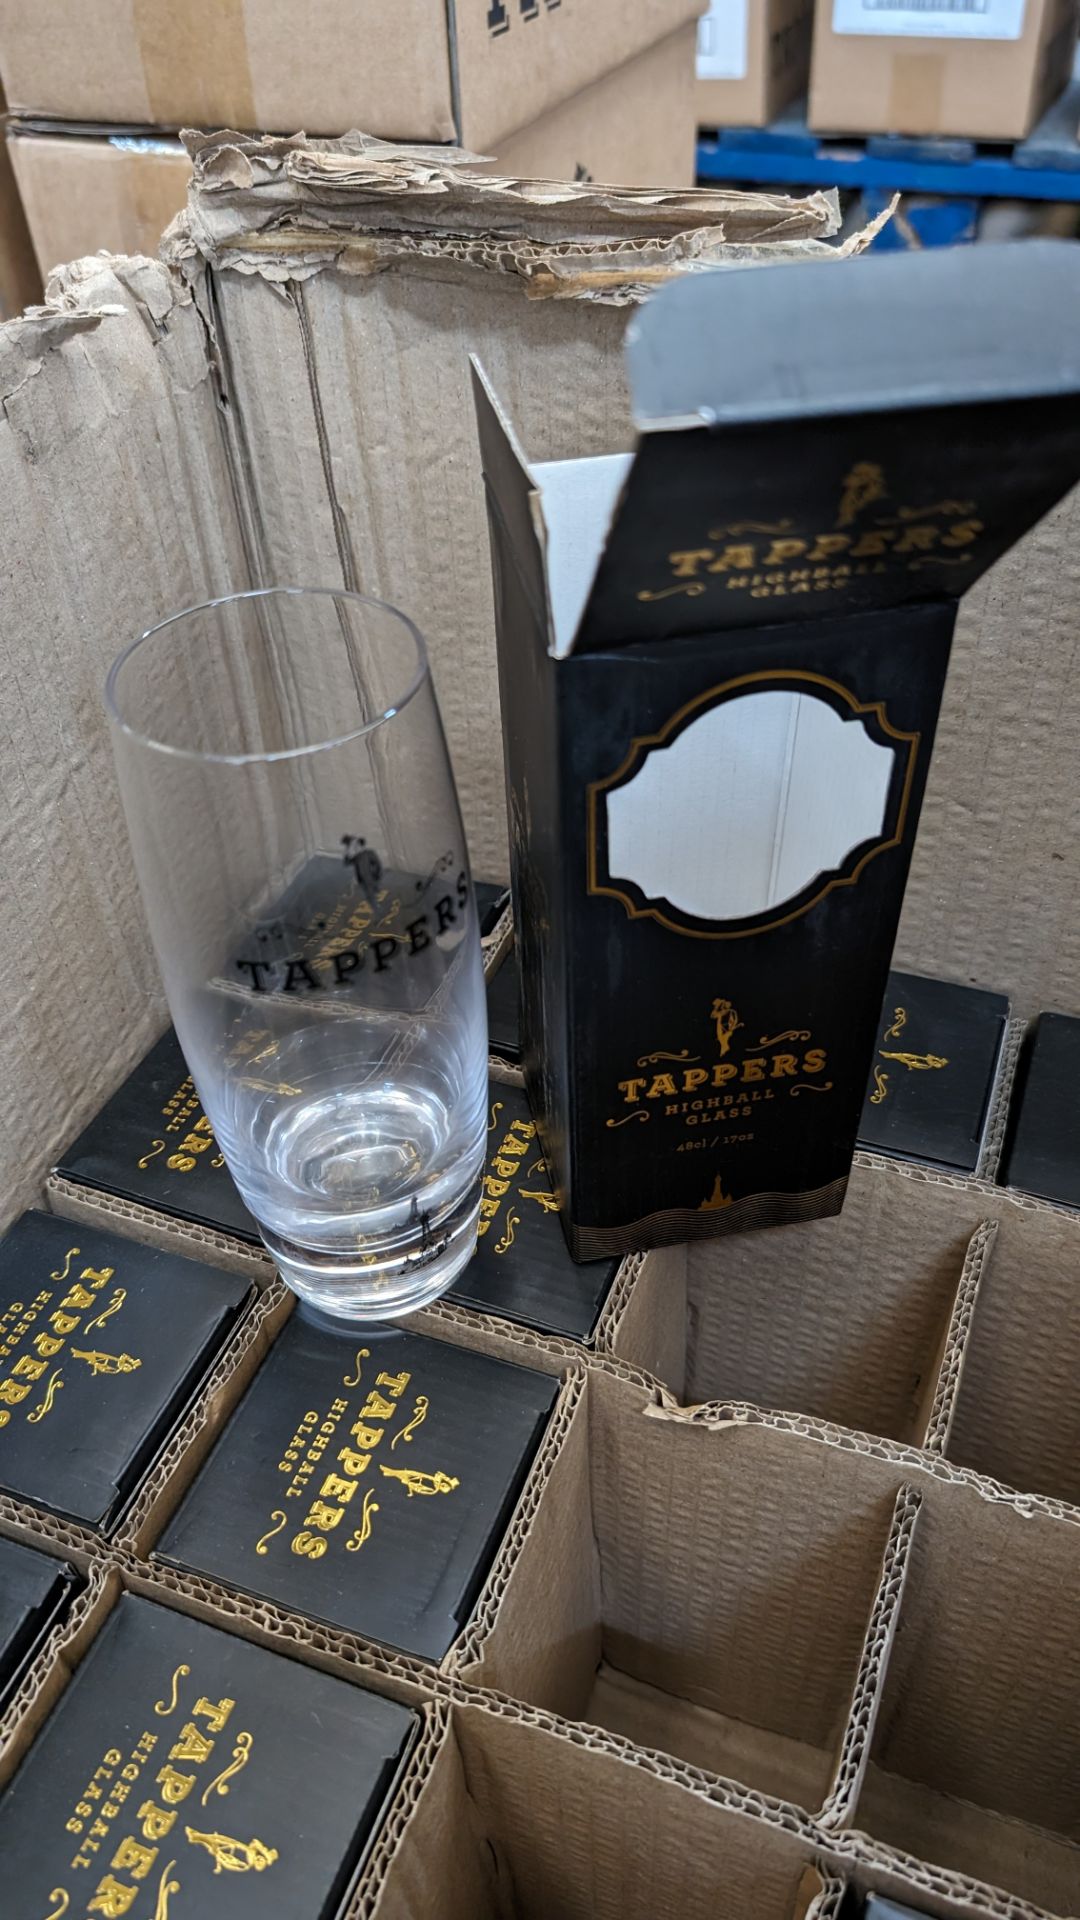 20 off Tappers branded 480ml/17oz highball glasses, each in their own presentation box - Image 3 of 4